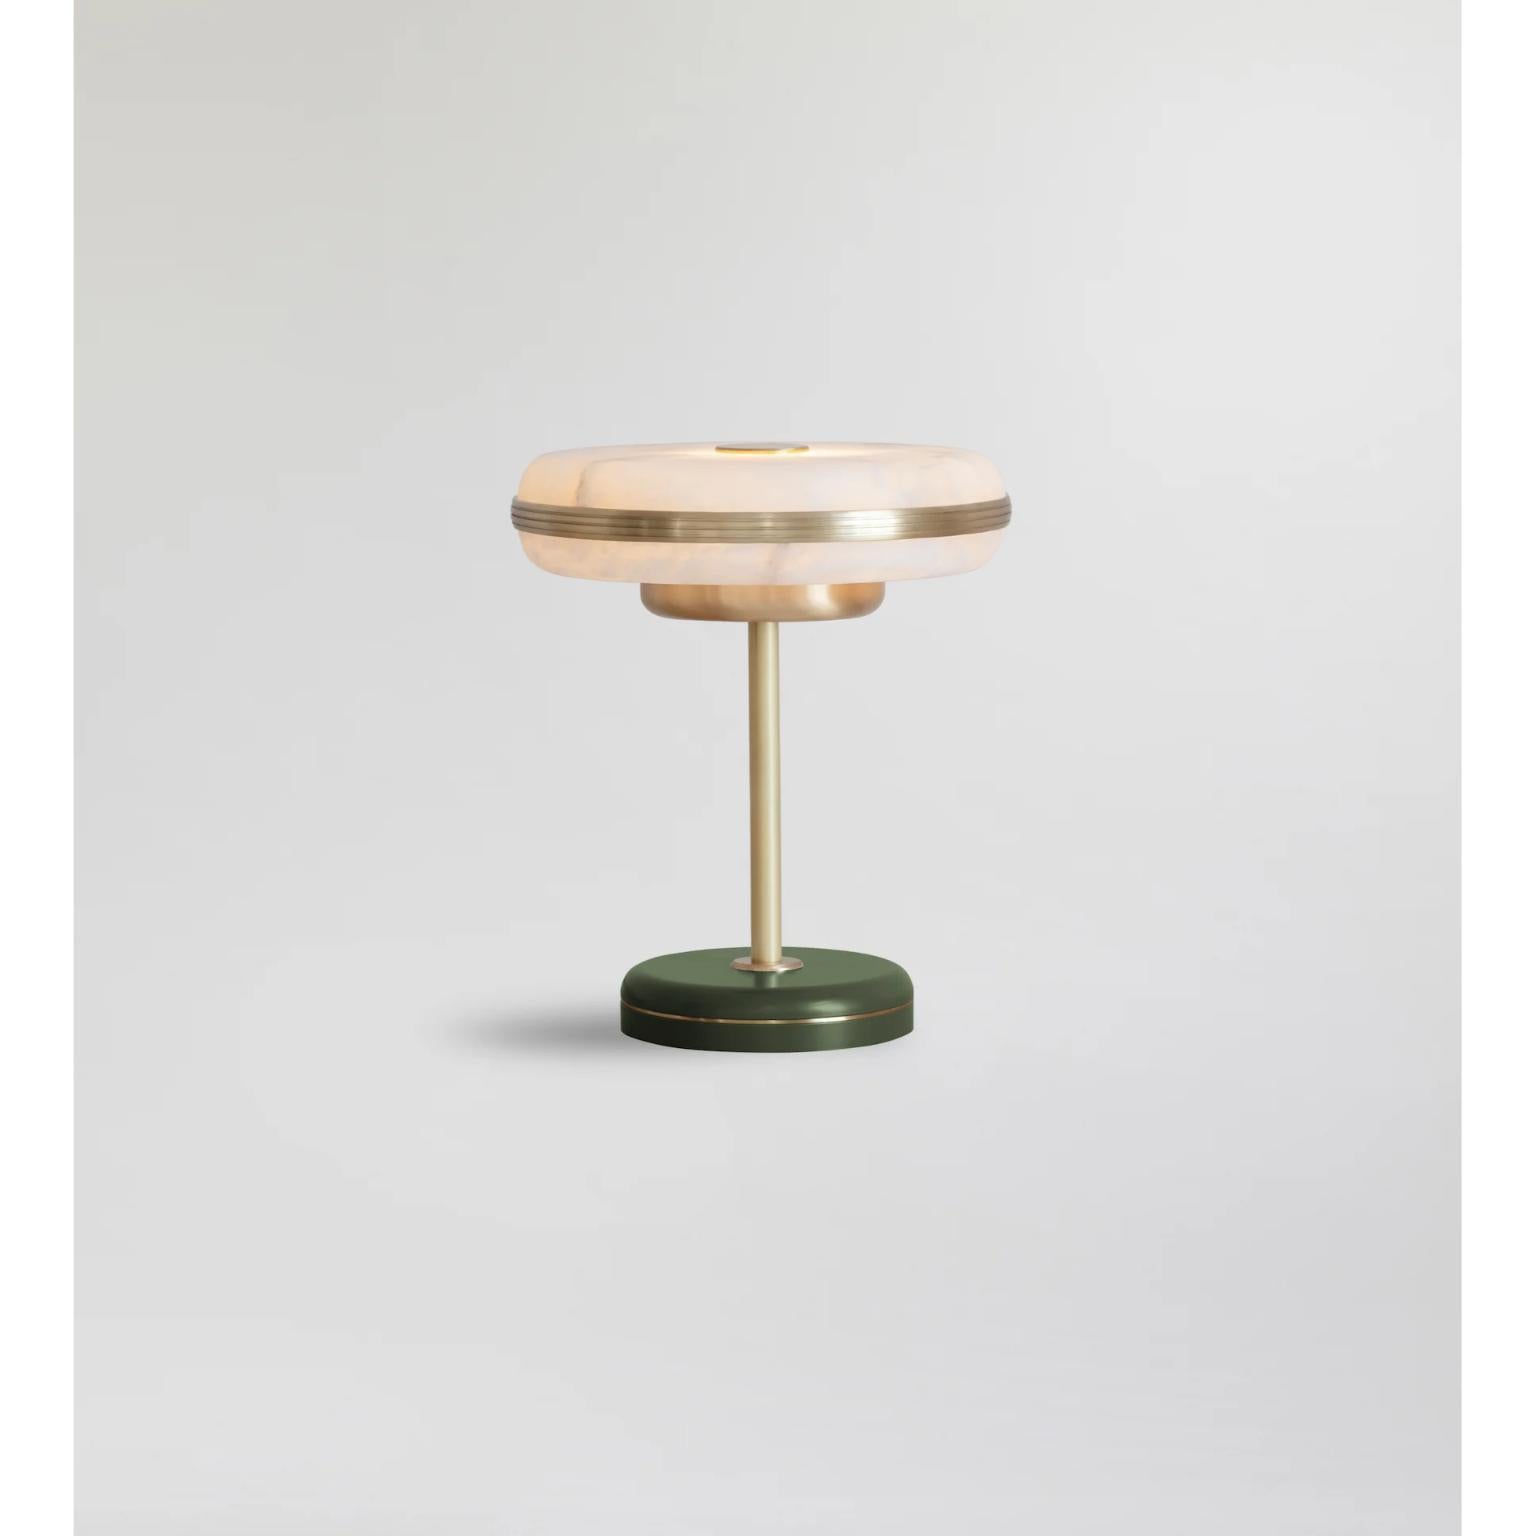 Beran Brushed Brass Small Table Lamp by Bert Frank
Dimensions: Ø 26 x H 28 cm.
Materials: Brass and alabaster.
Base finish: Olive.

Available in two different sizes. Available in different finishes and materials. Please contact us. 

The natural